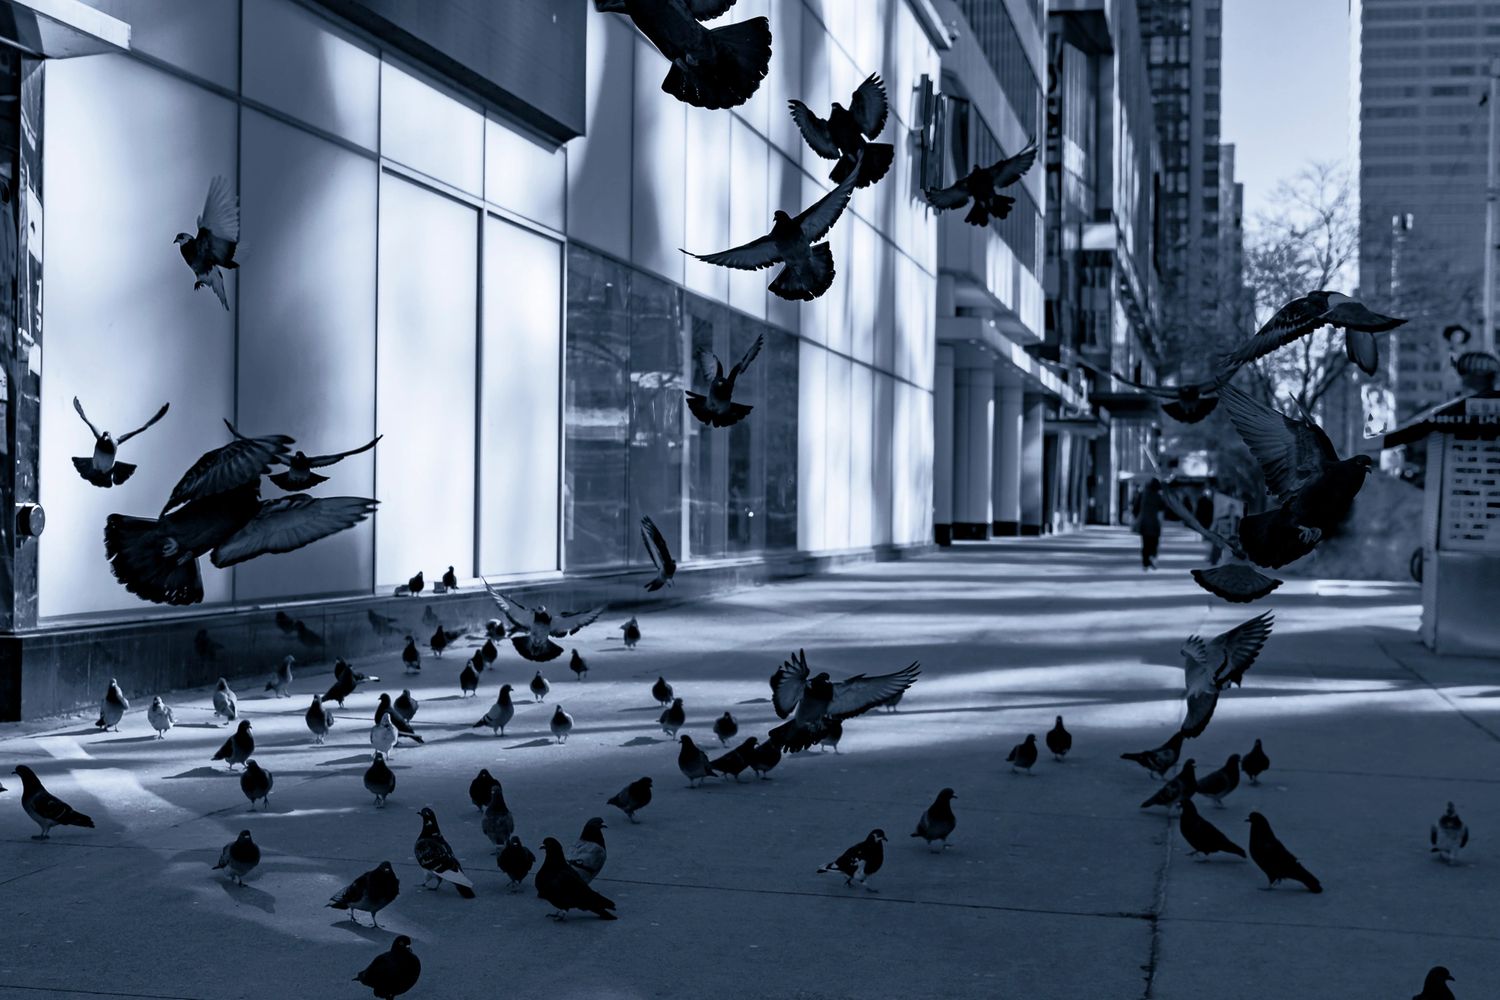 The pigeons fly as people as I walk toward the birds.